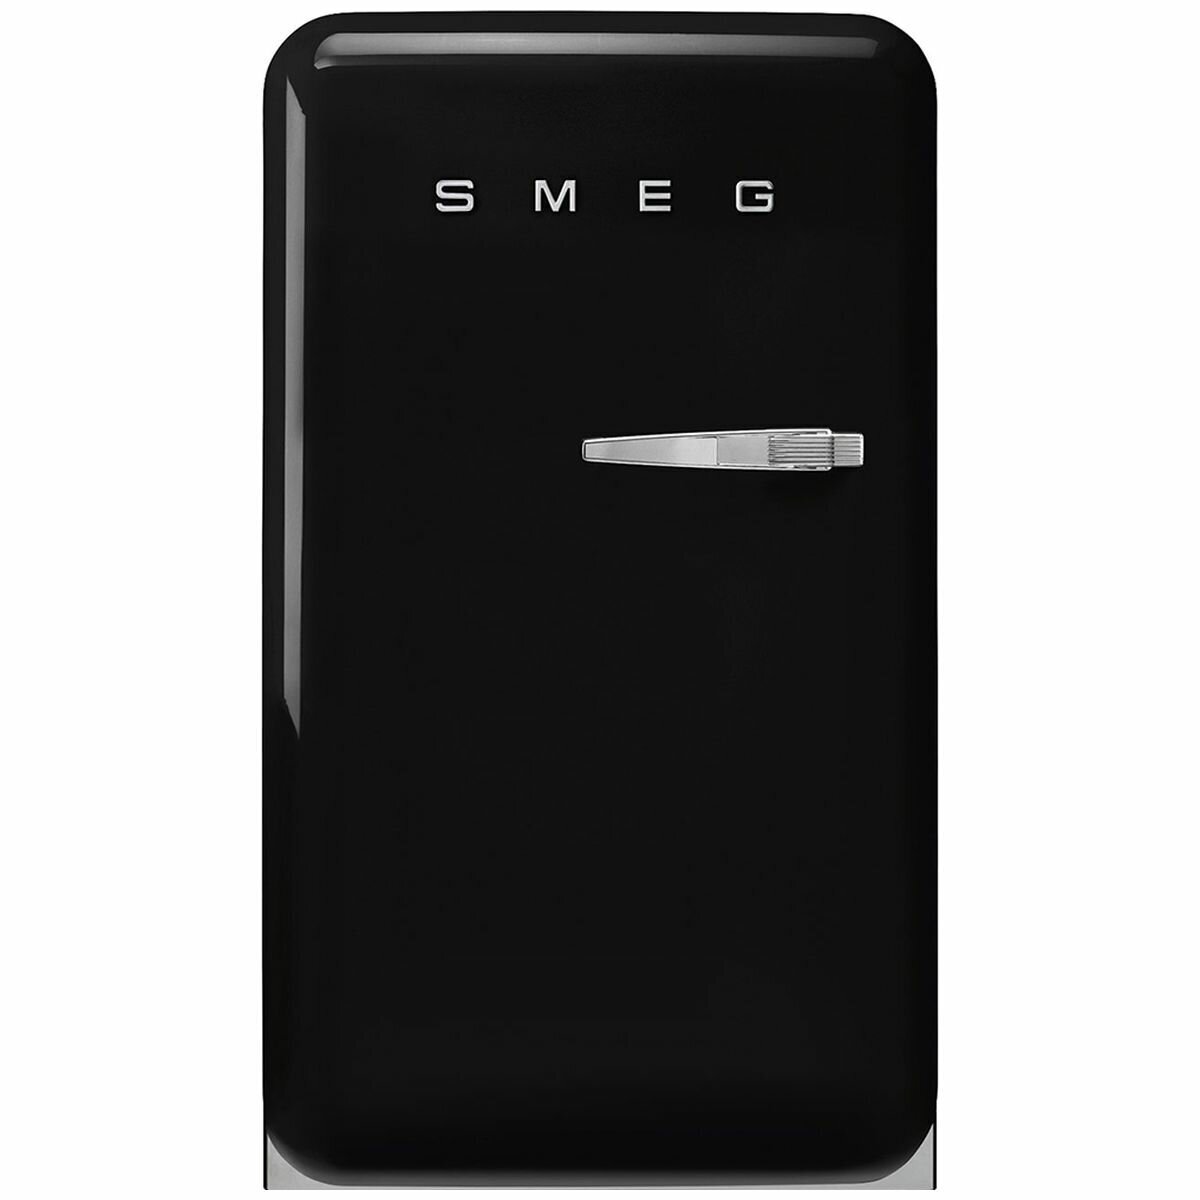 Smeg - Technology with style